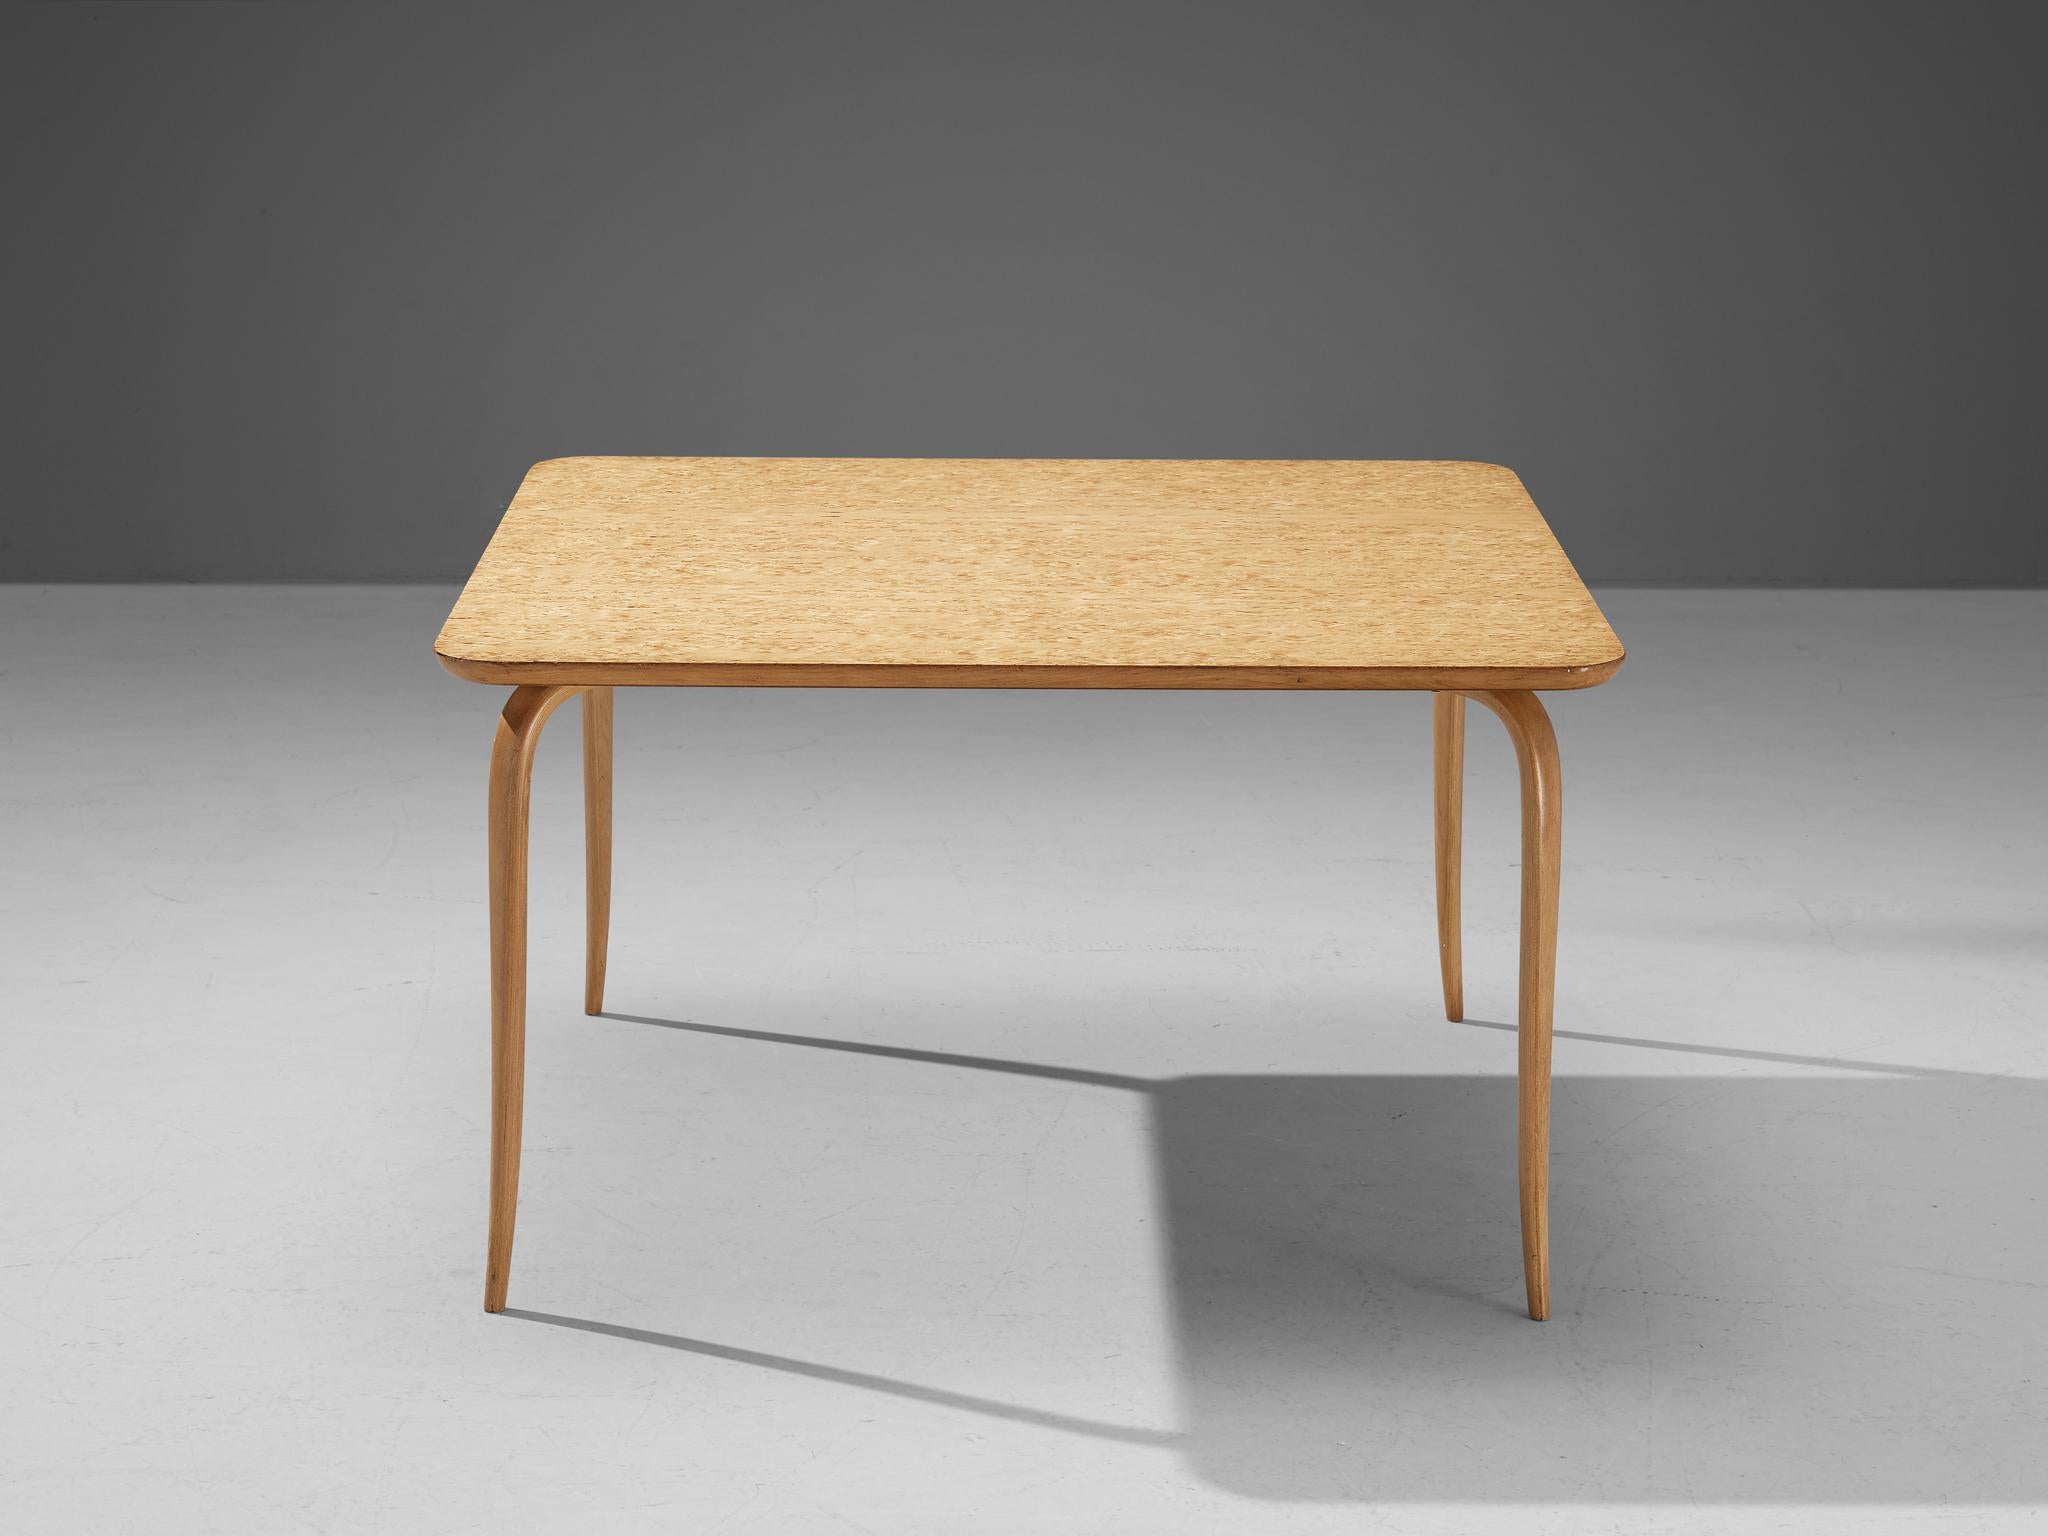 Bruno Mathsson, coffee table model 'Annika', birch, Sweden 1950s.

This so called 'Annika' coffee table has birch plywood legs, which are fluently curved and tapered. These light legs are elegantly built and give this piece its unique appearance.